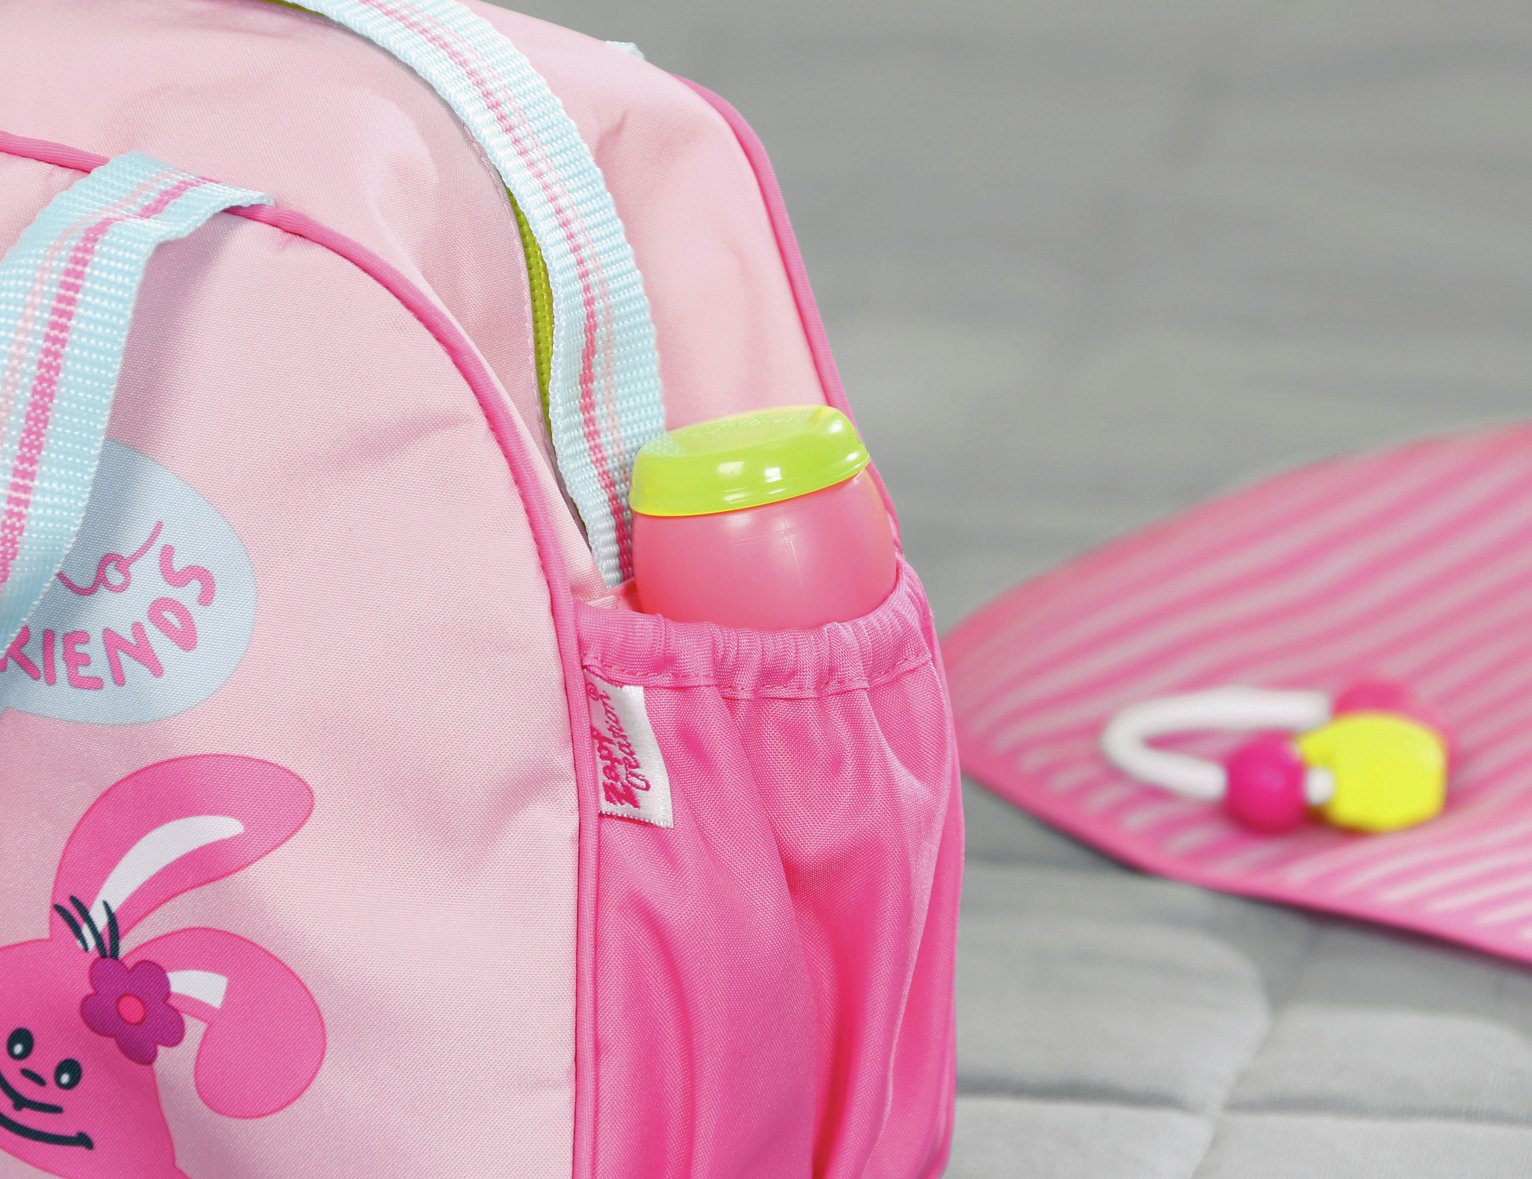 BABY born Dolls Changing Bag Review